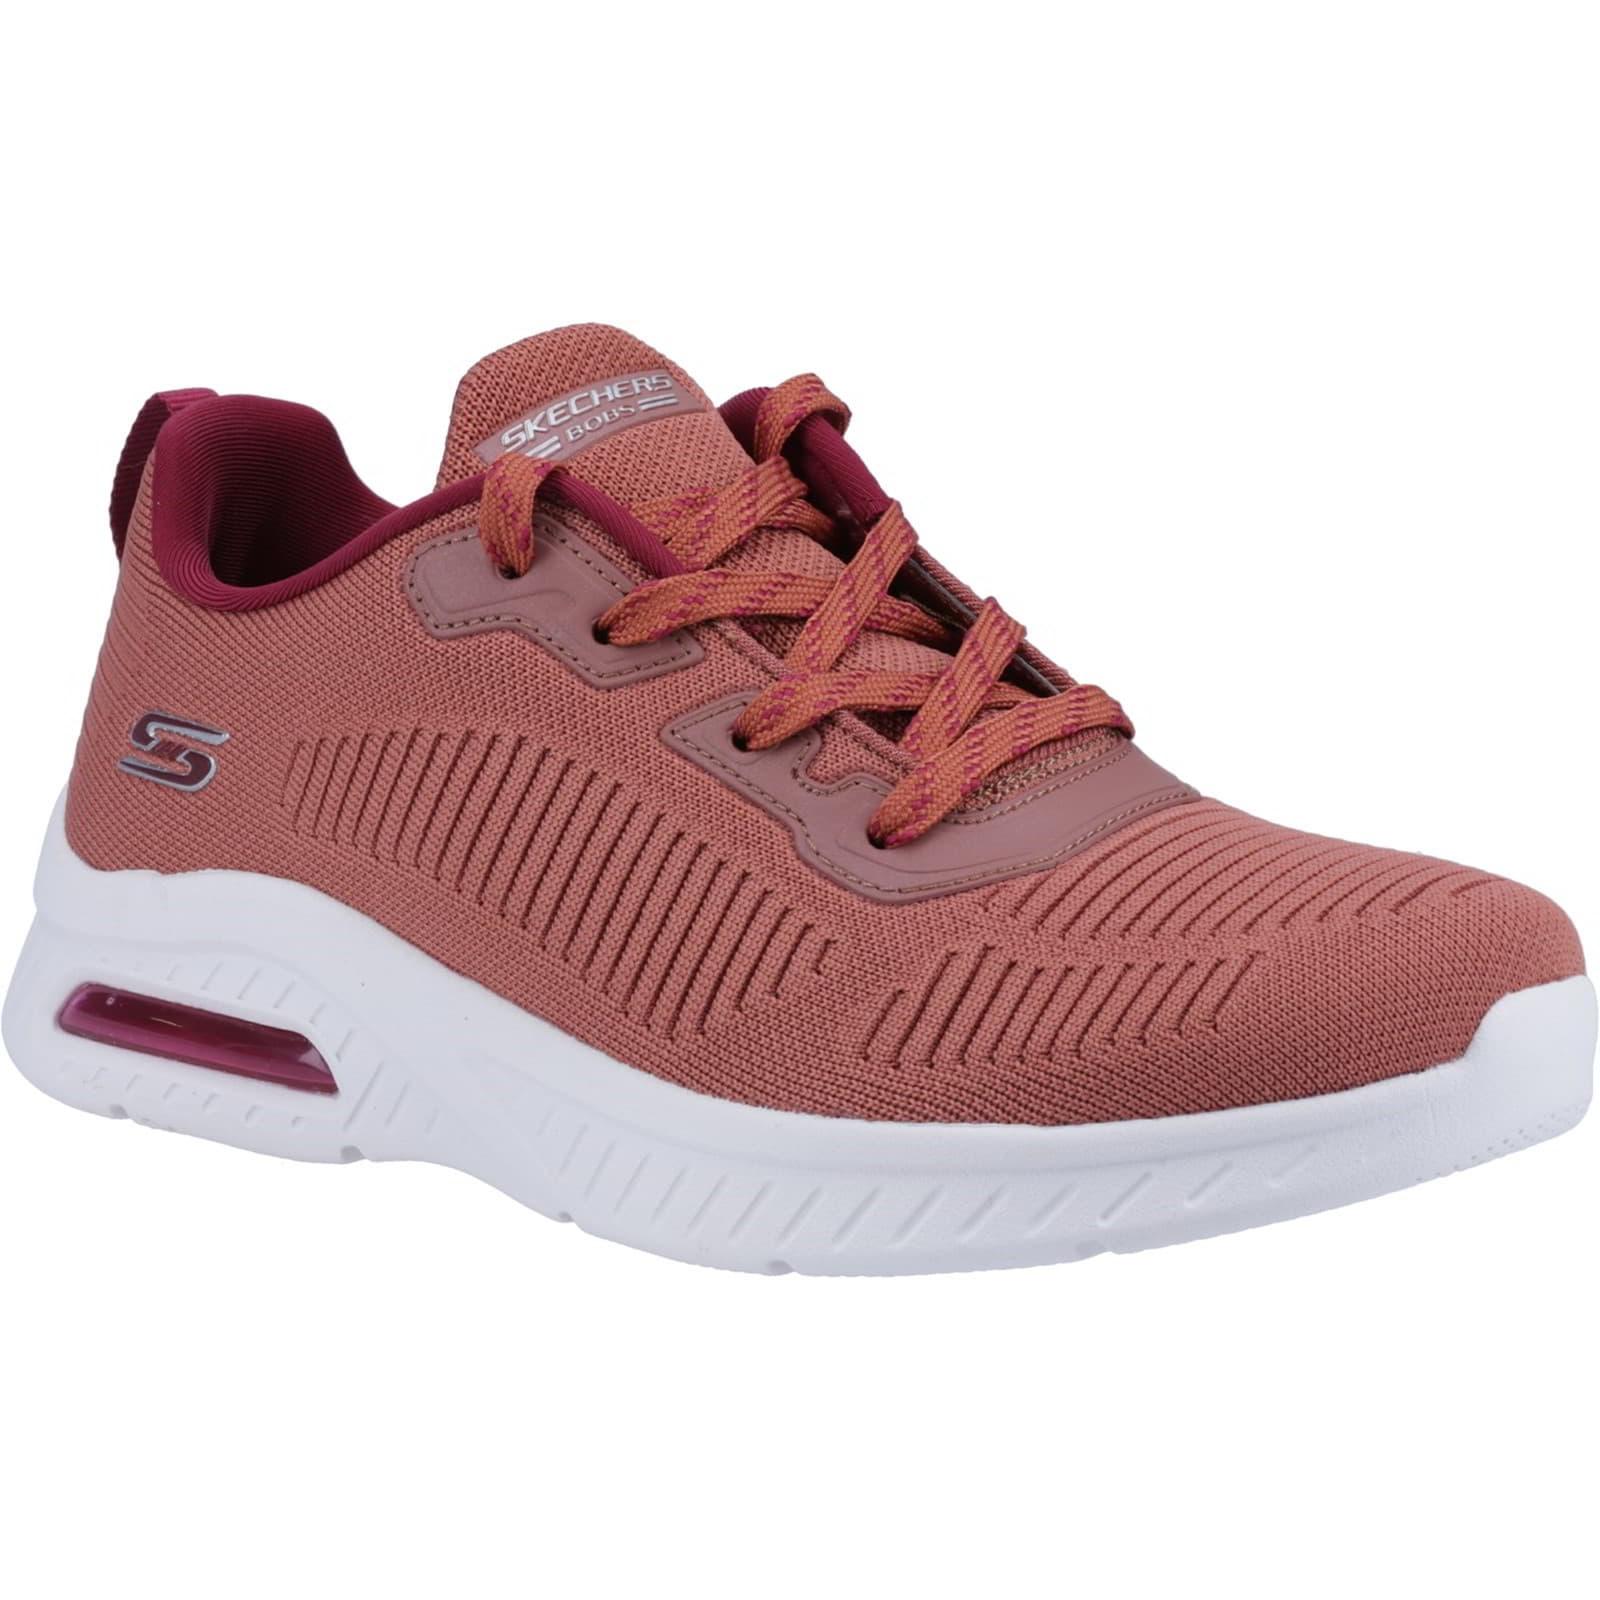 Skechers Women's Bobs Squad Air Sweet Encounter Trainers - Rust